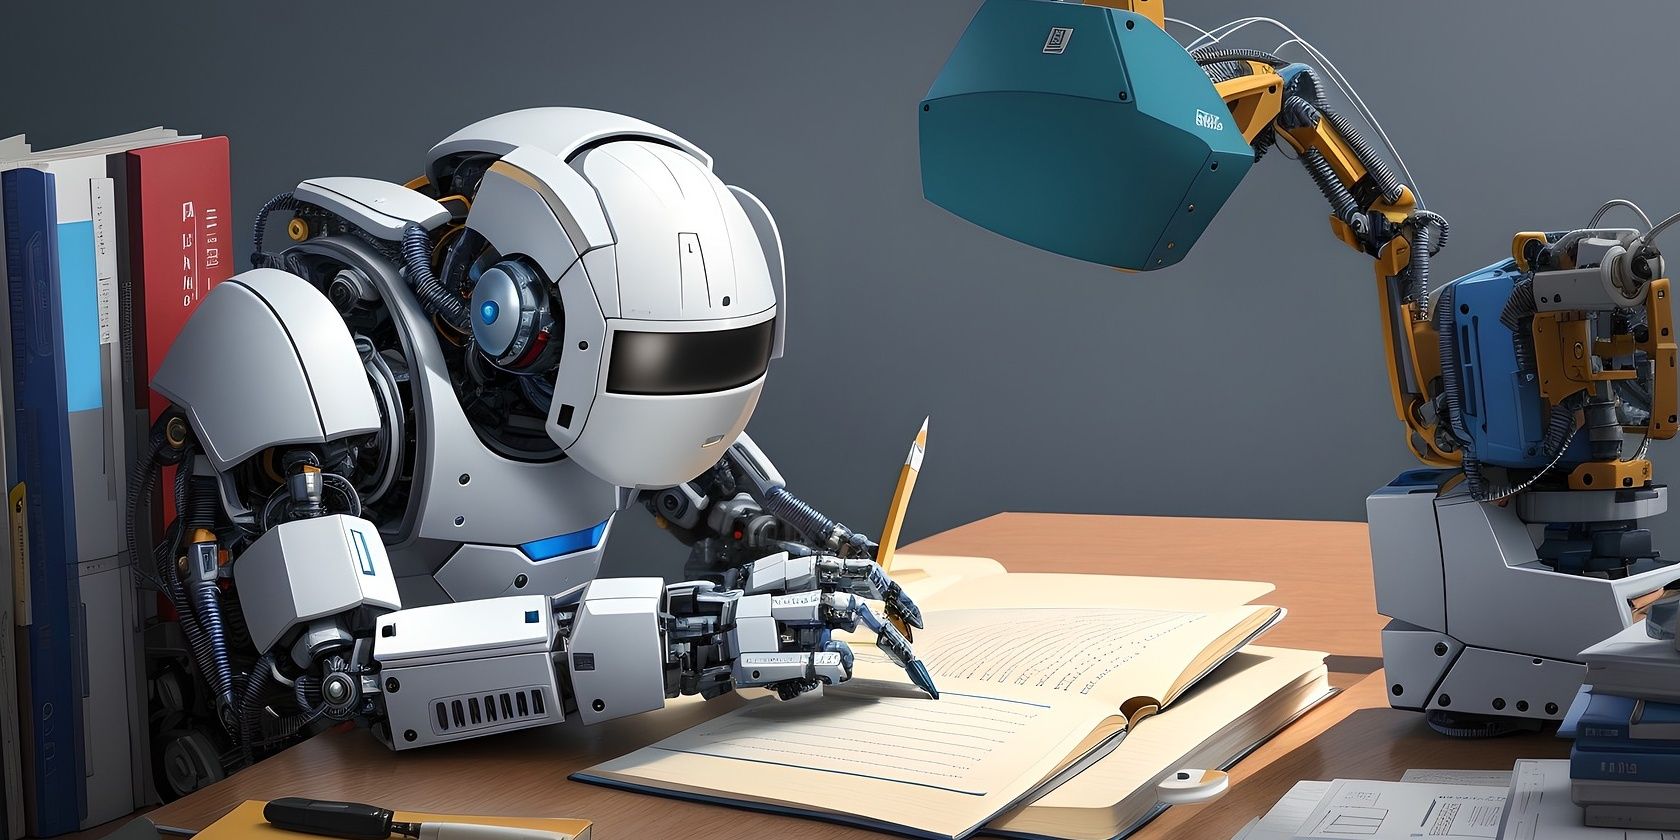 robot holding a pencil pointing to a book